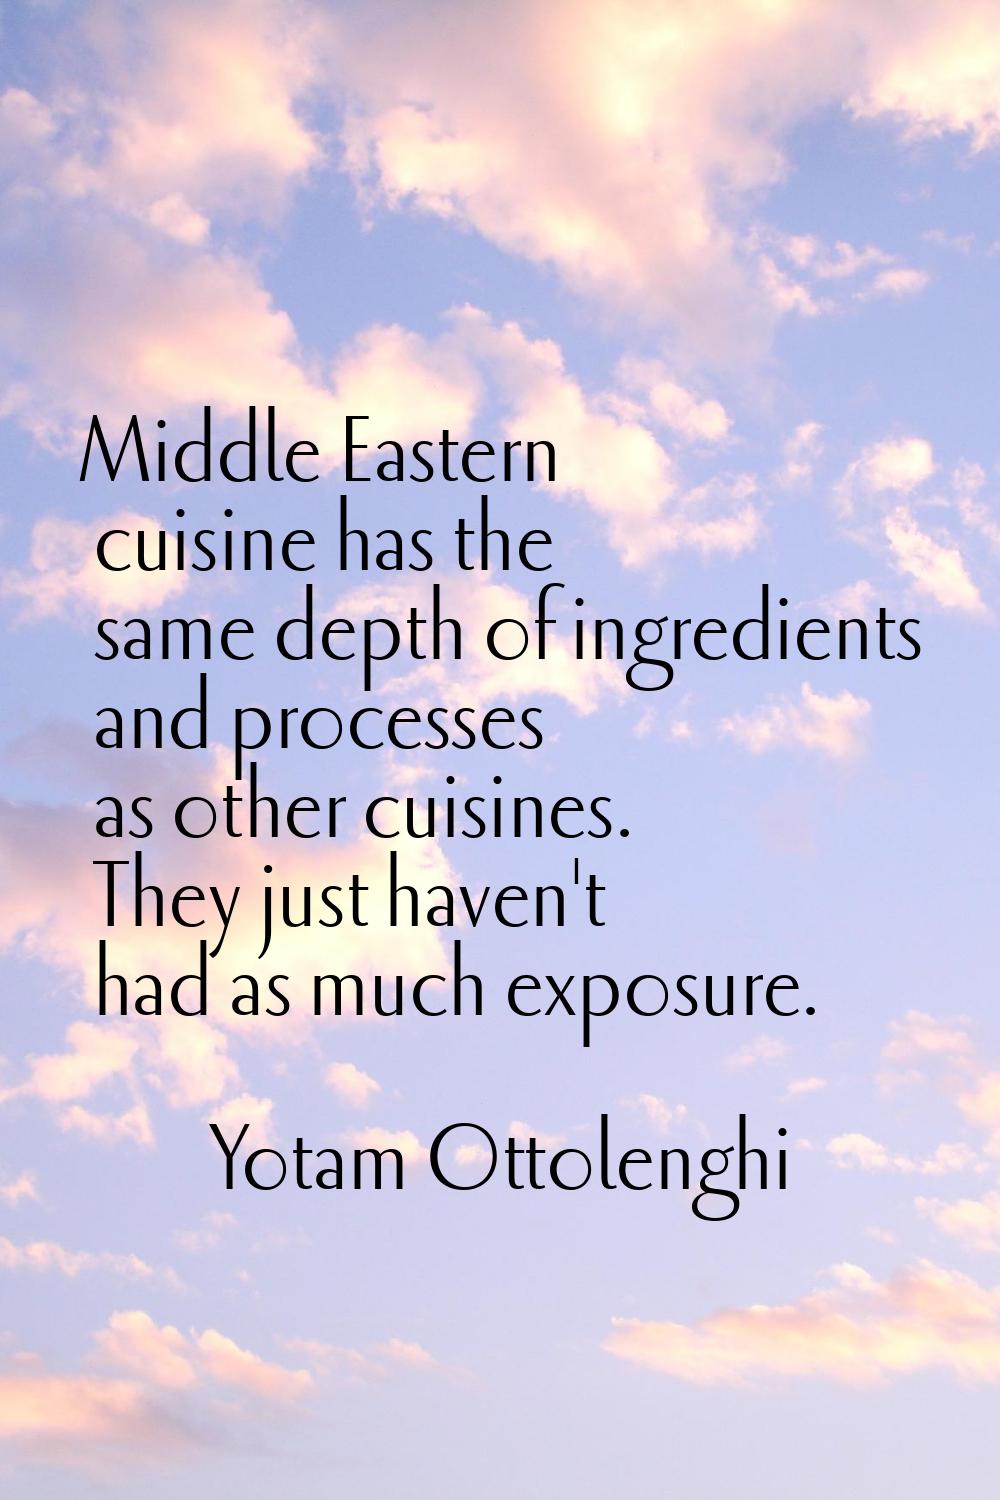 Middle Eastern cuisine has the same depth of ingredients and processes as other cuisines. They just